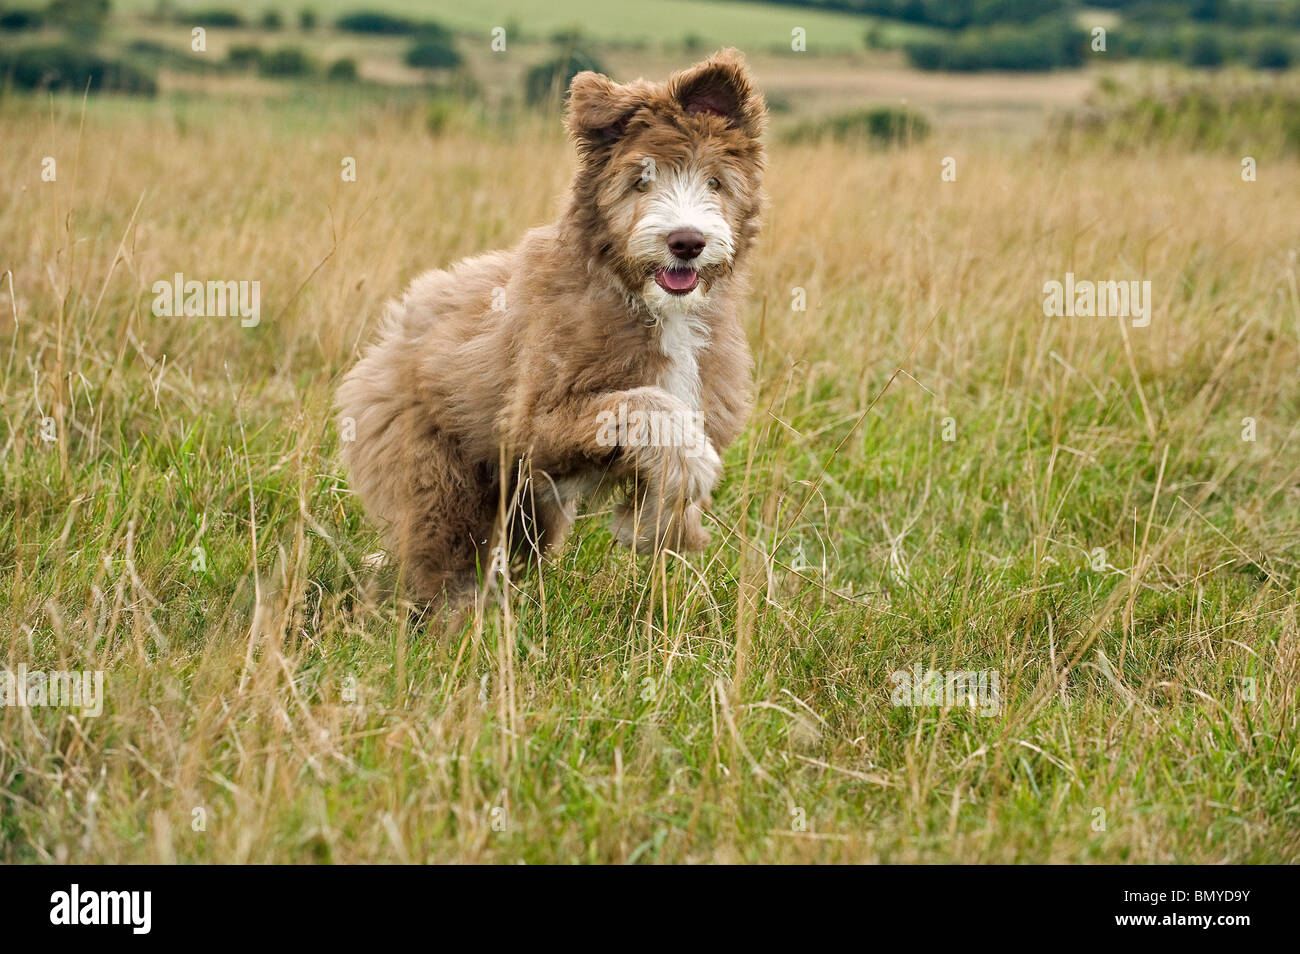 young half breed dog running meadow Stock Photo